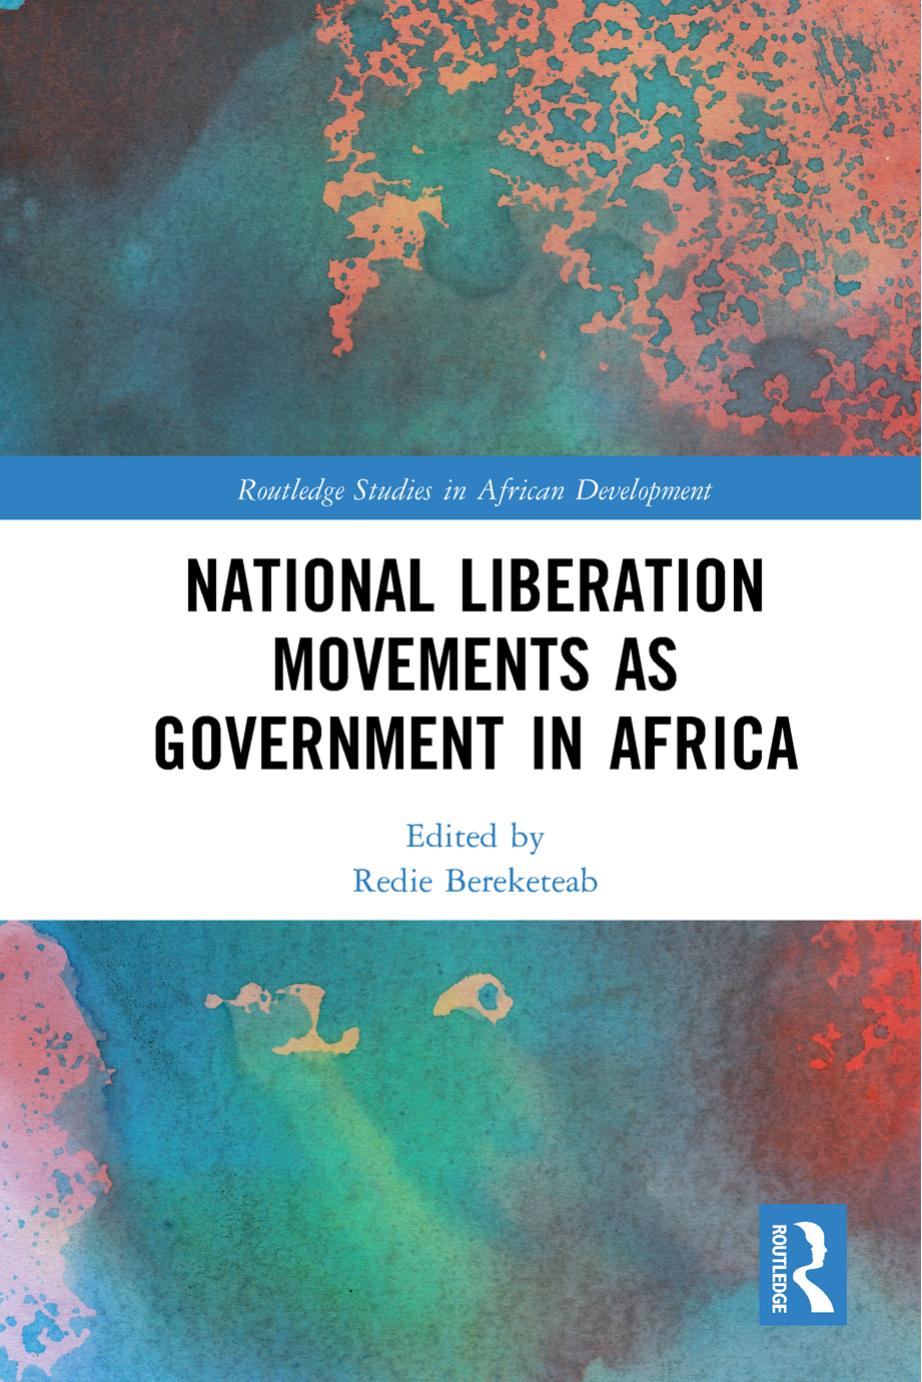 National Liberation Movements as Government in Africa 2018